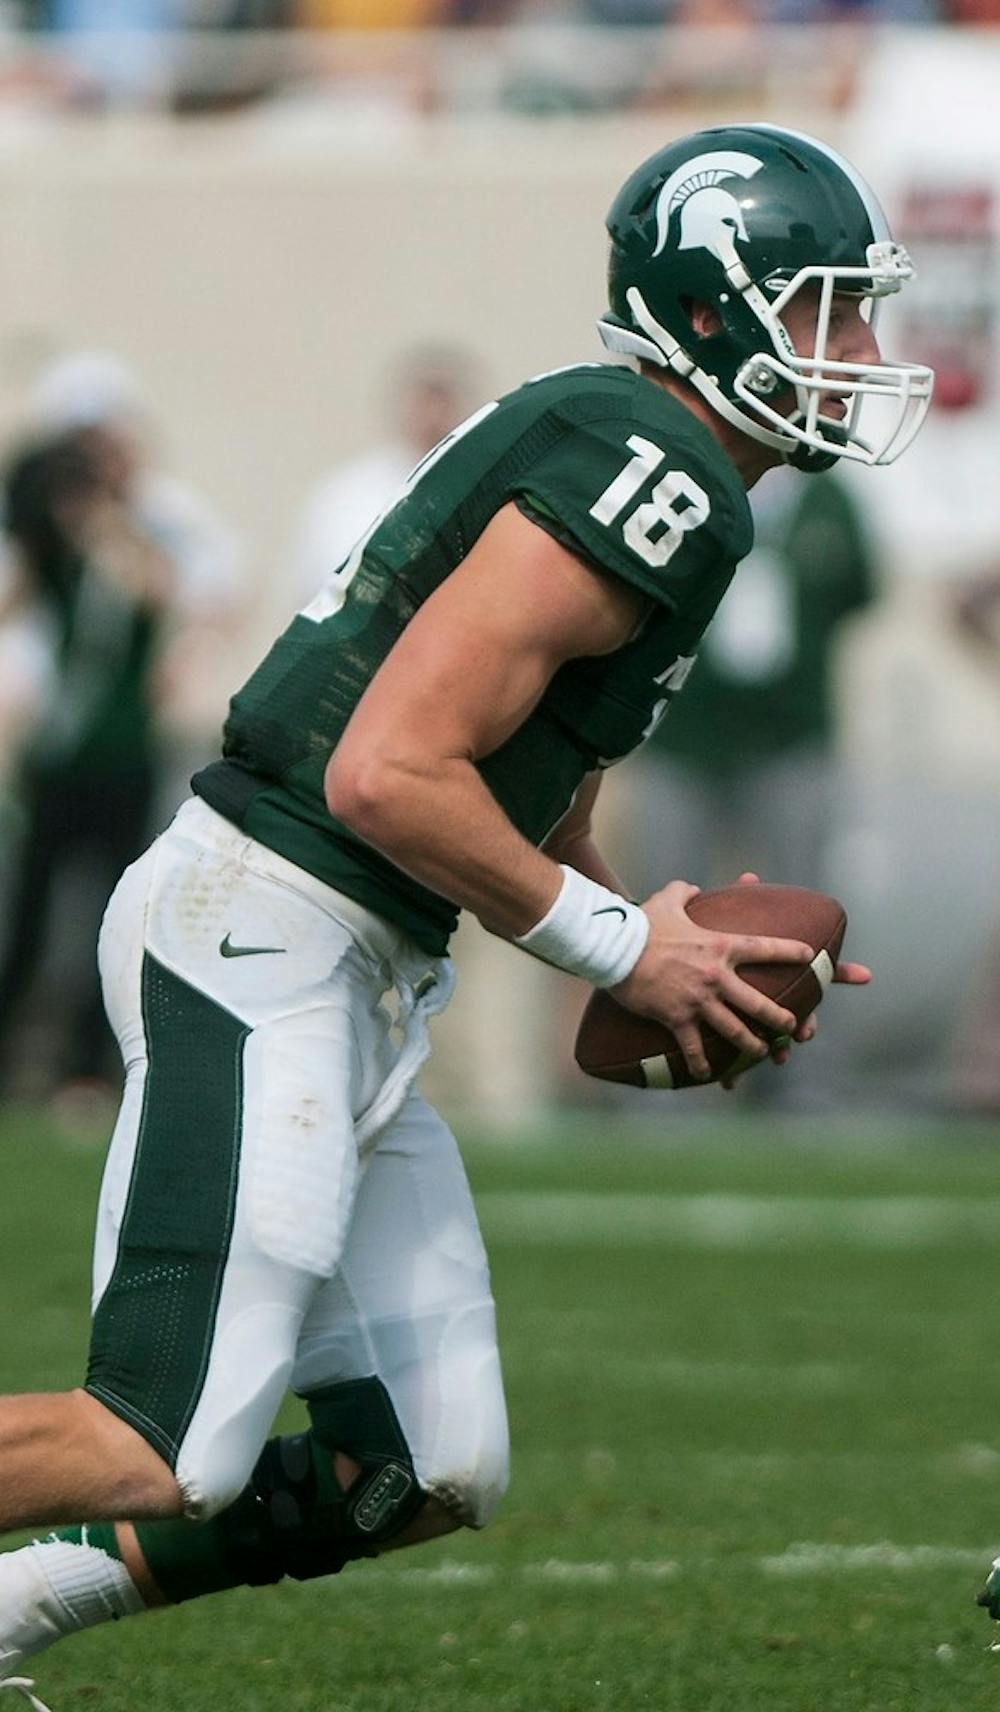 	<p>Sophomore quarterback Connor Cook, 18, looks for an open pass, Sept. 7, 2013, against South Florida at Spartan Stadium. The Spartans defeated the Bulls, 21-6. Margaux Forster/The State News </p>